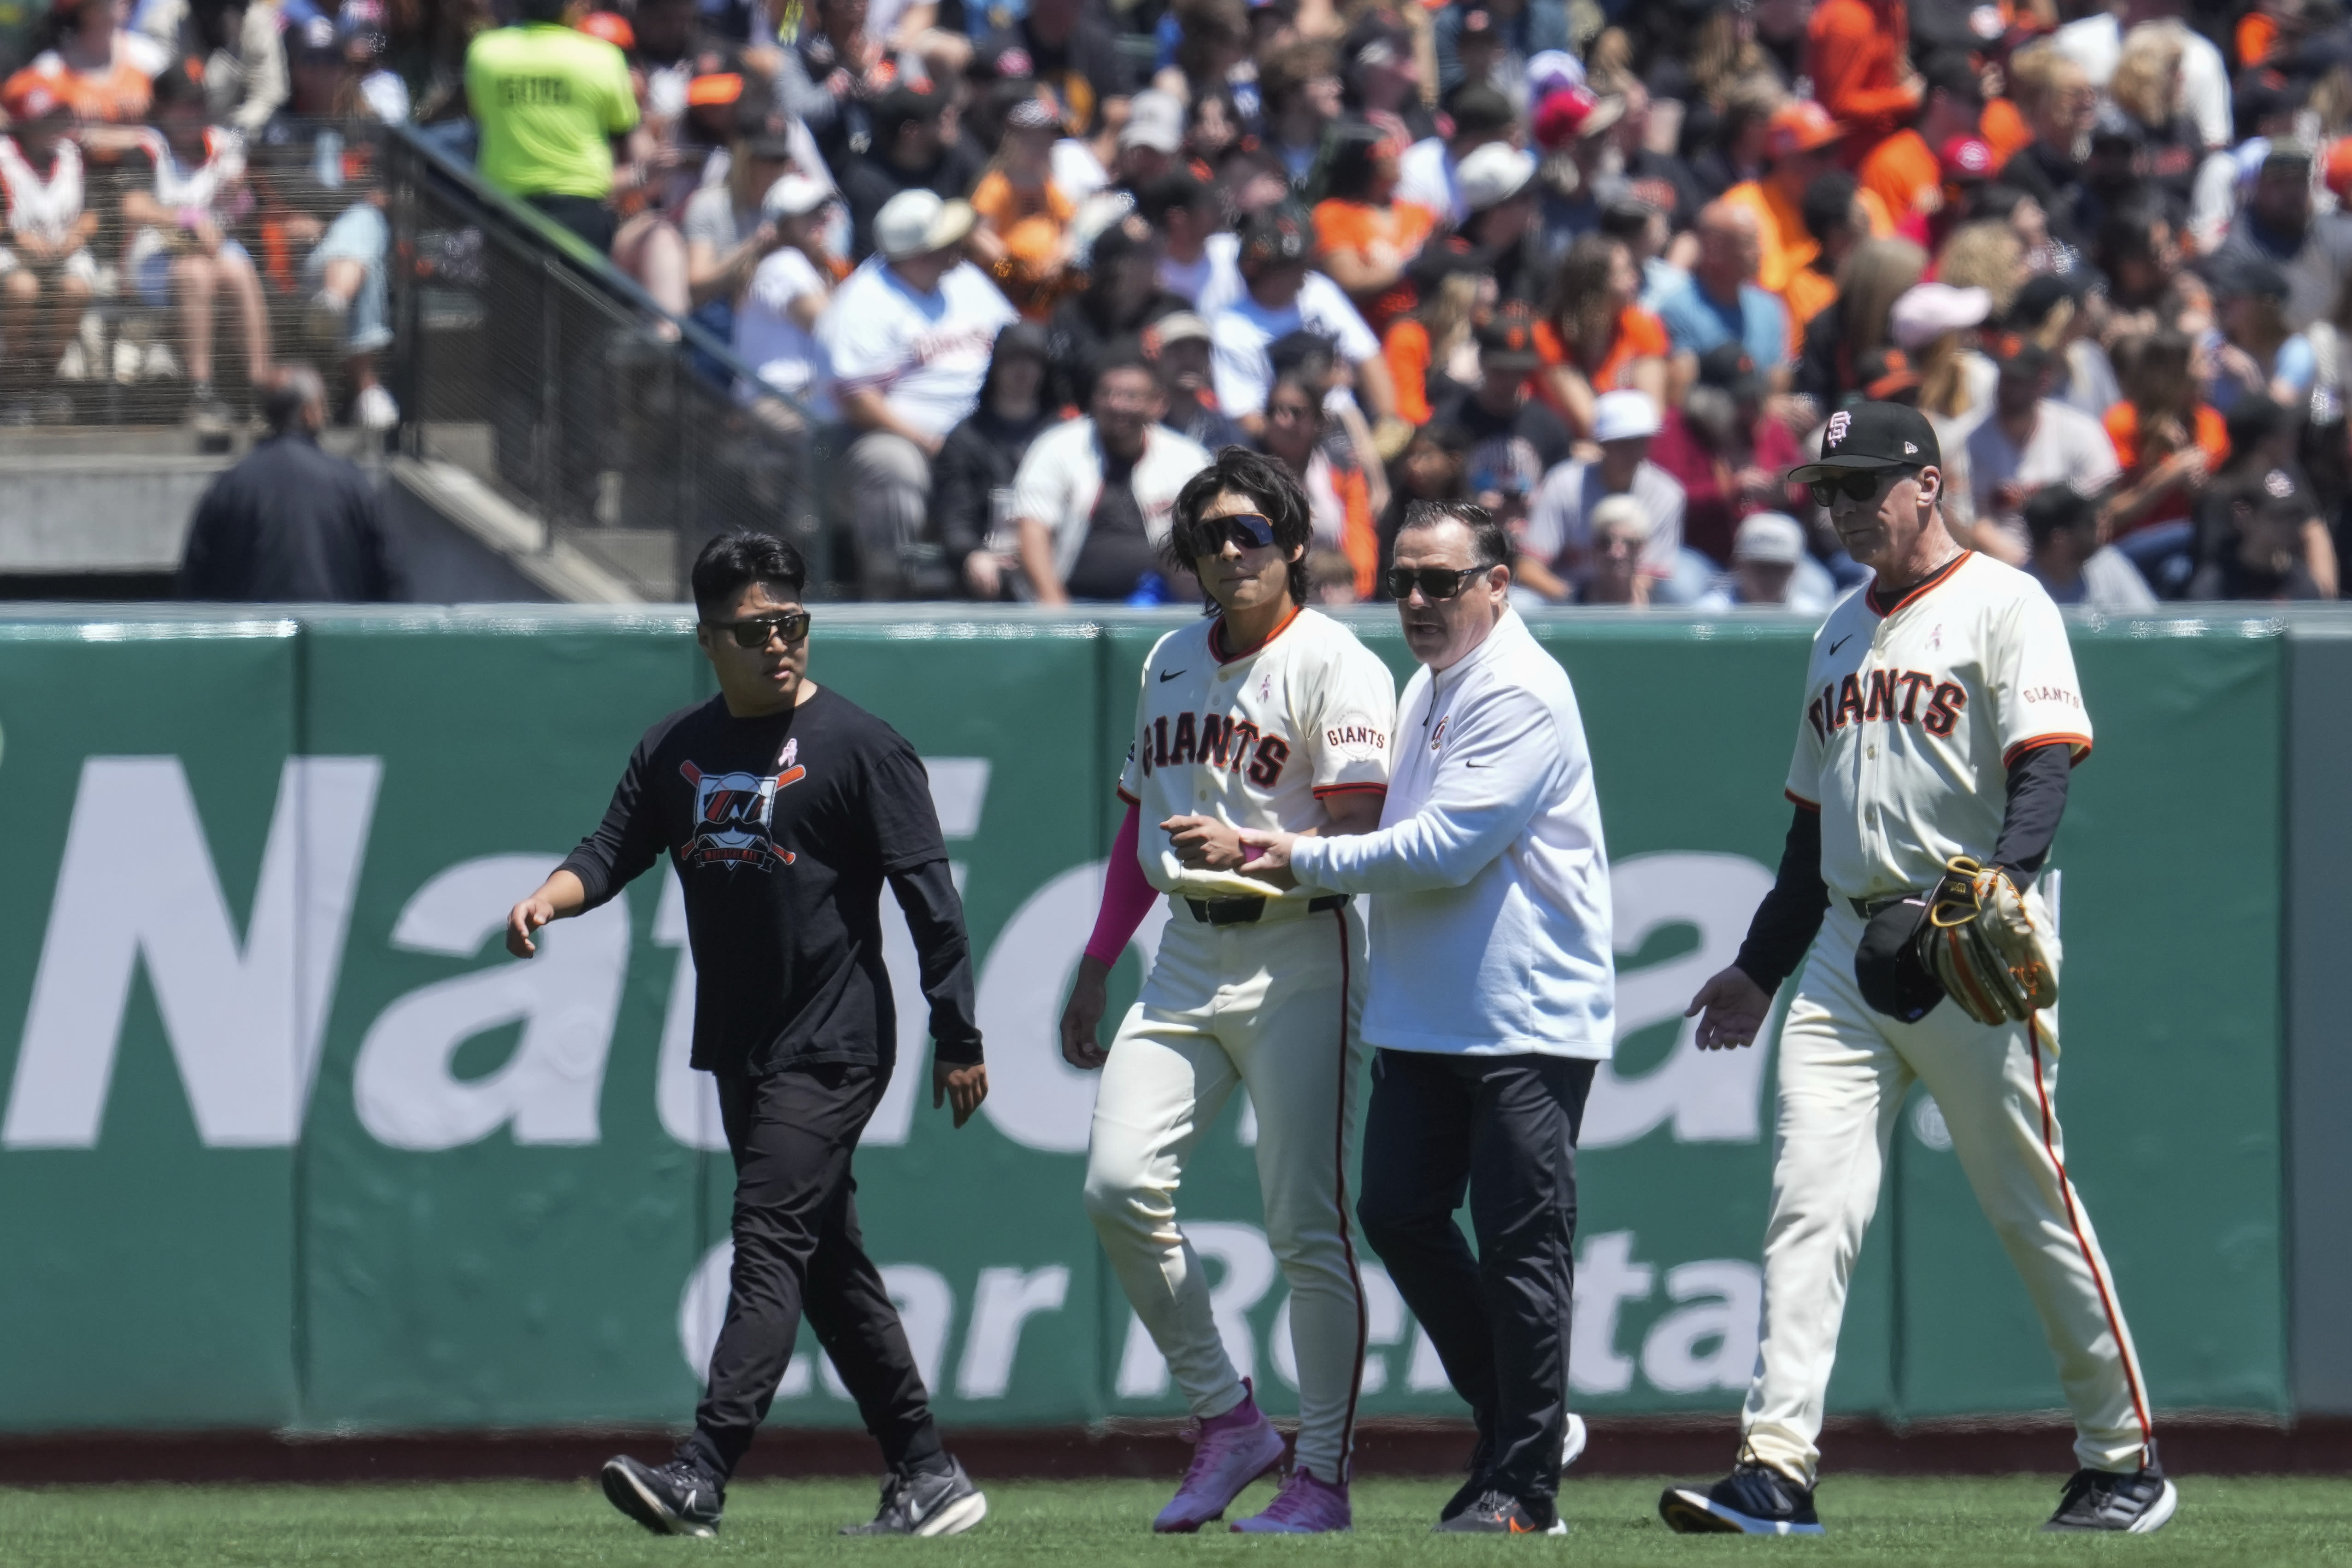 Giants' Jung Hoo Lee to have season-ending surgery on dislocated left shoulder